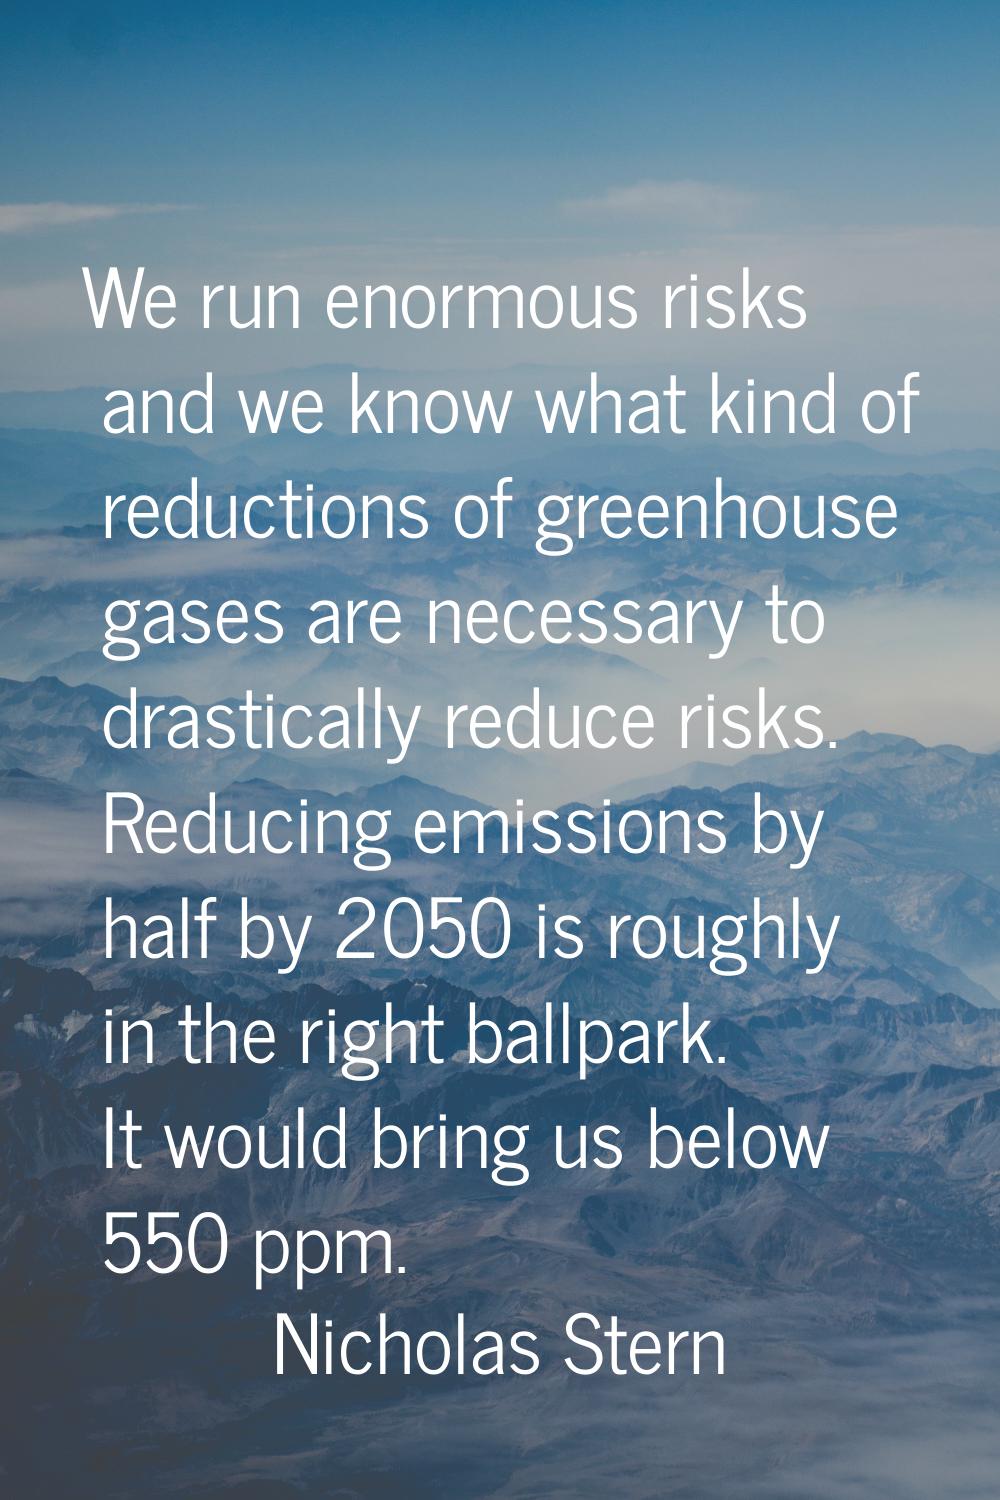 We run enormous risks and we know what kind of reductions of greenhouse gases are necessary to dras